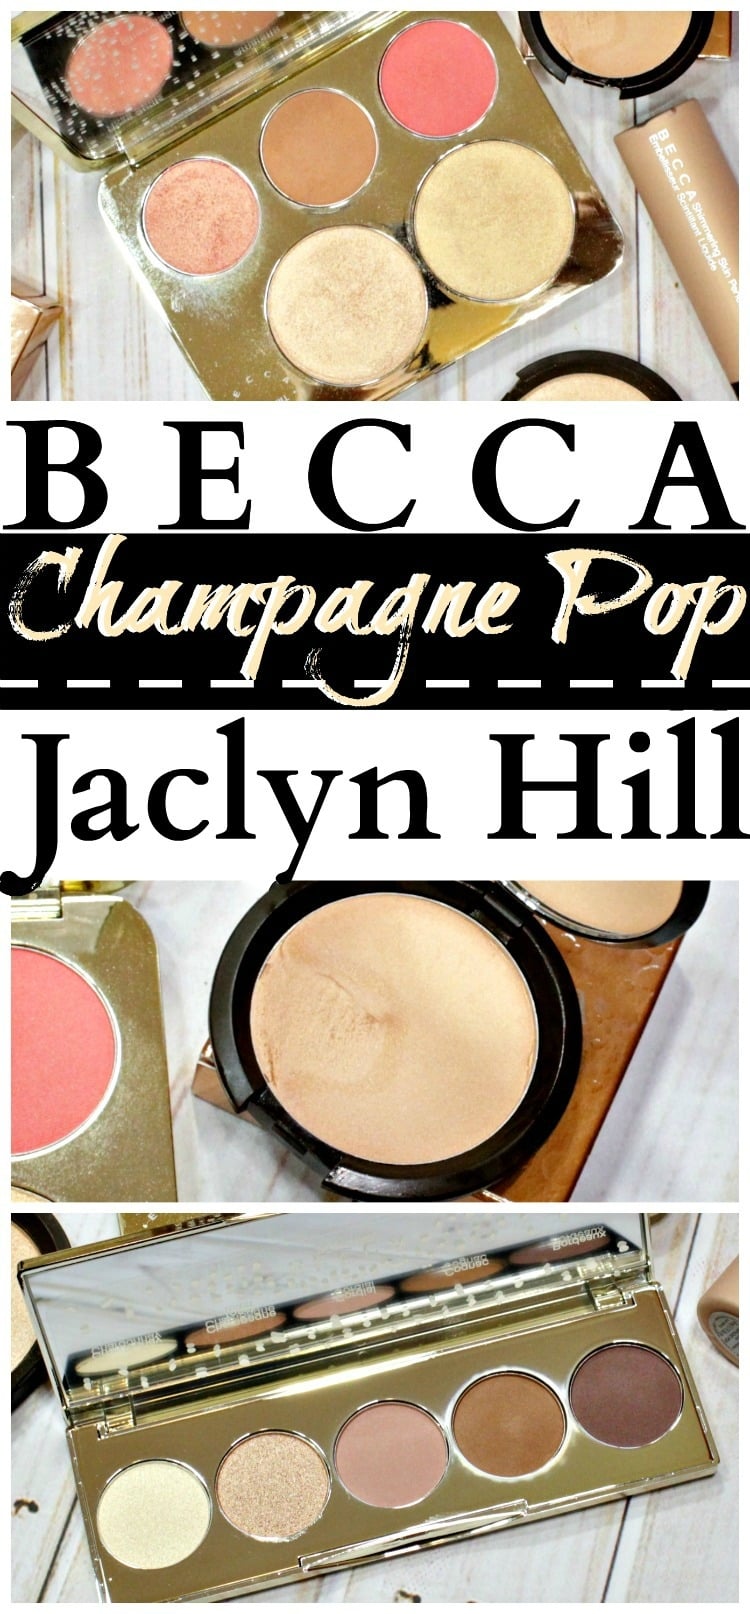 BECCA-x-Jaclyn-Hill-Champagne-POP Collection-Pinterest-swatches-review-photos-pics